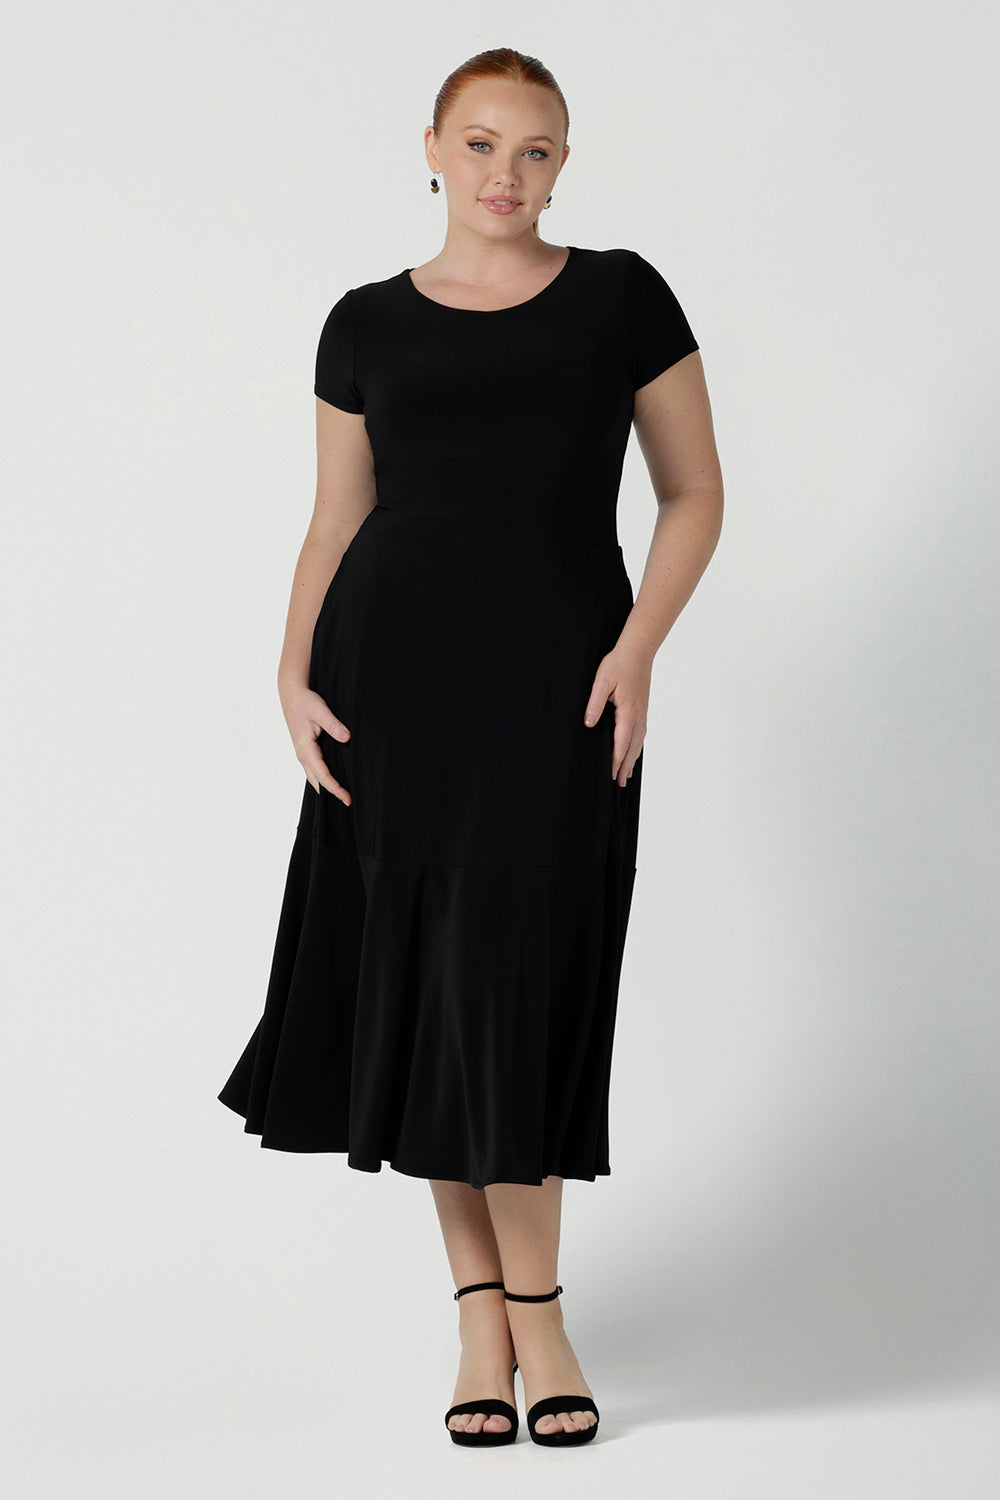 The Amal dress in black is a slim fit round neck dress with waist seam and tier at the bottom. Functioning pockets. Great for work or event occasions. Made in Australia. Size inclusive fashion for women size 8 - 24.